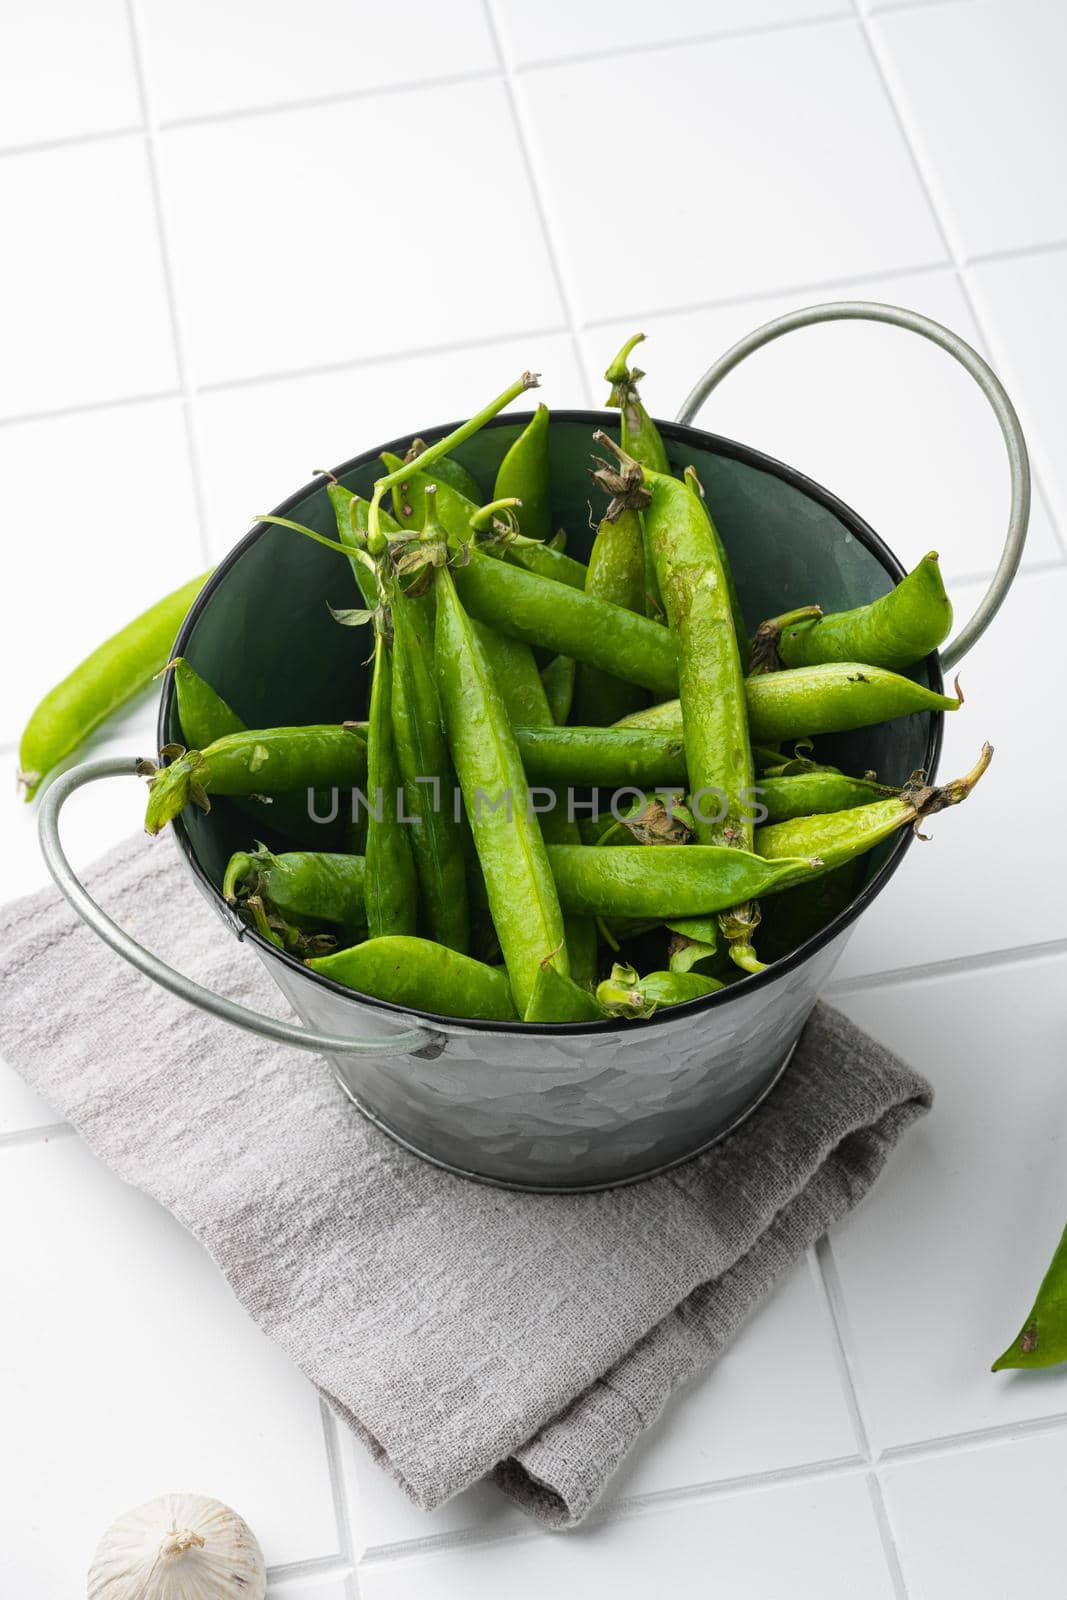 Pods of green peas on white ceramic squared tile table background by Ilianesolenyi